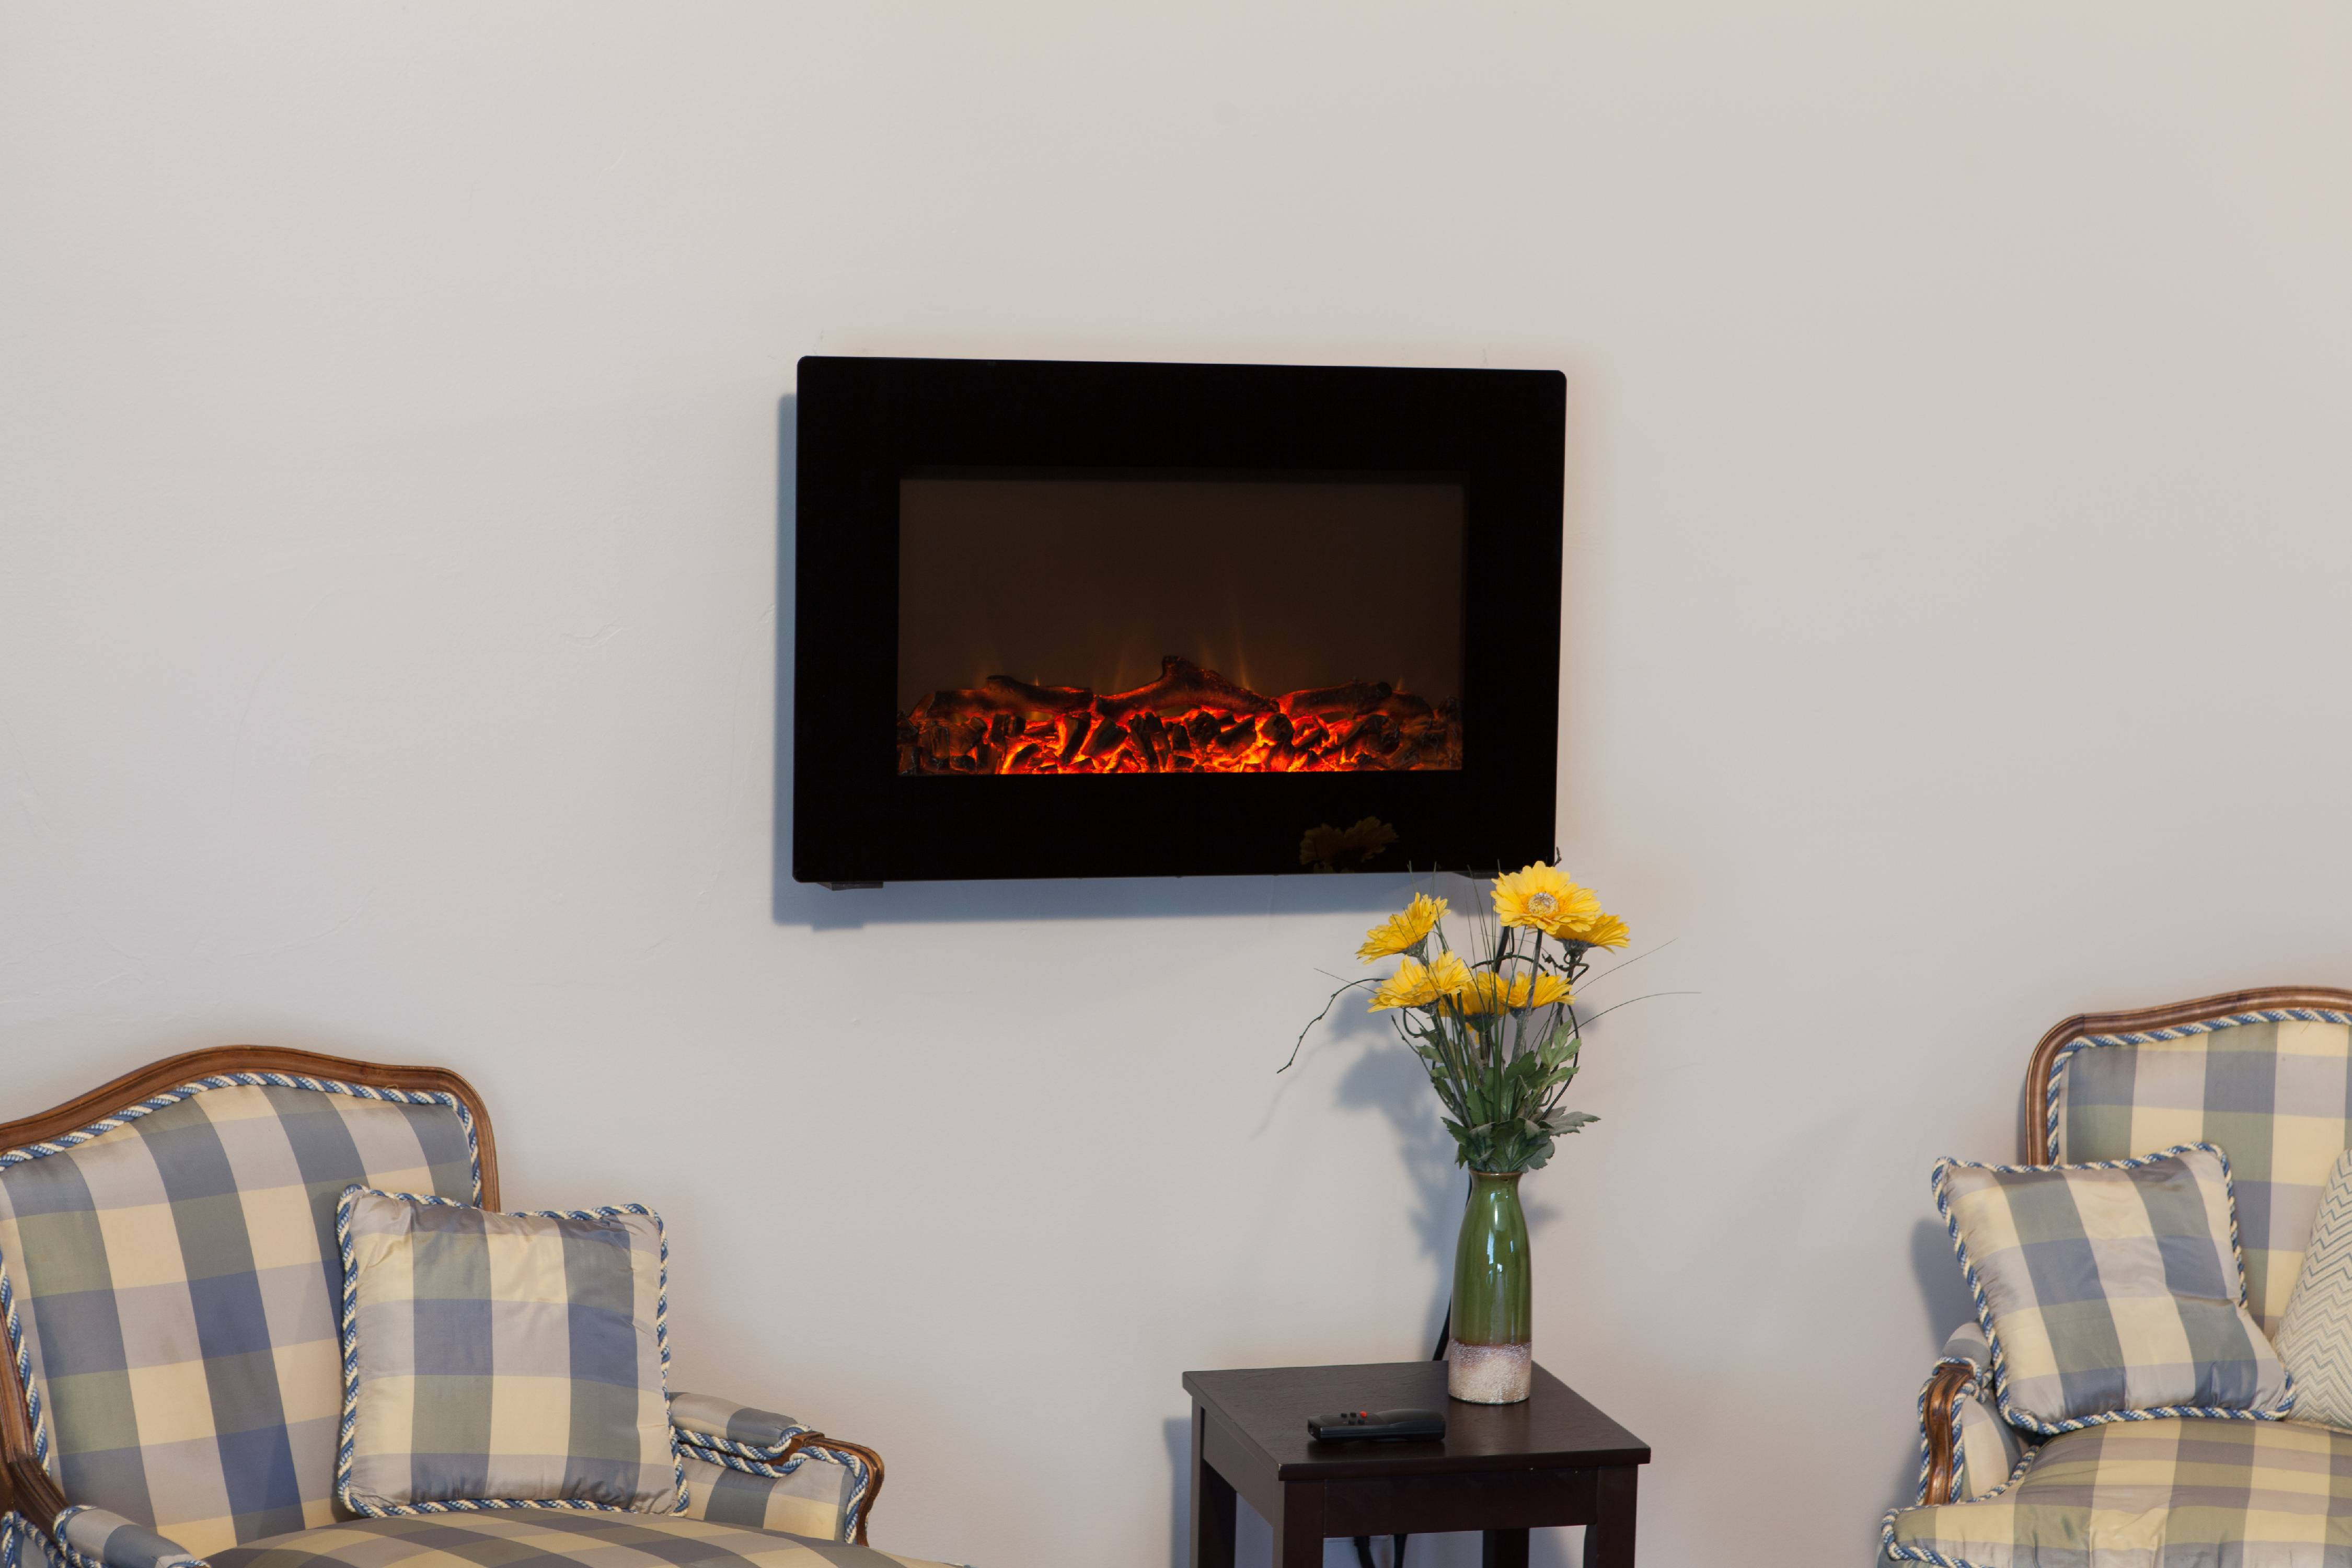 Black Wall Mounted Electric Fireplace - image 5 of 7